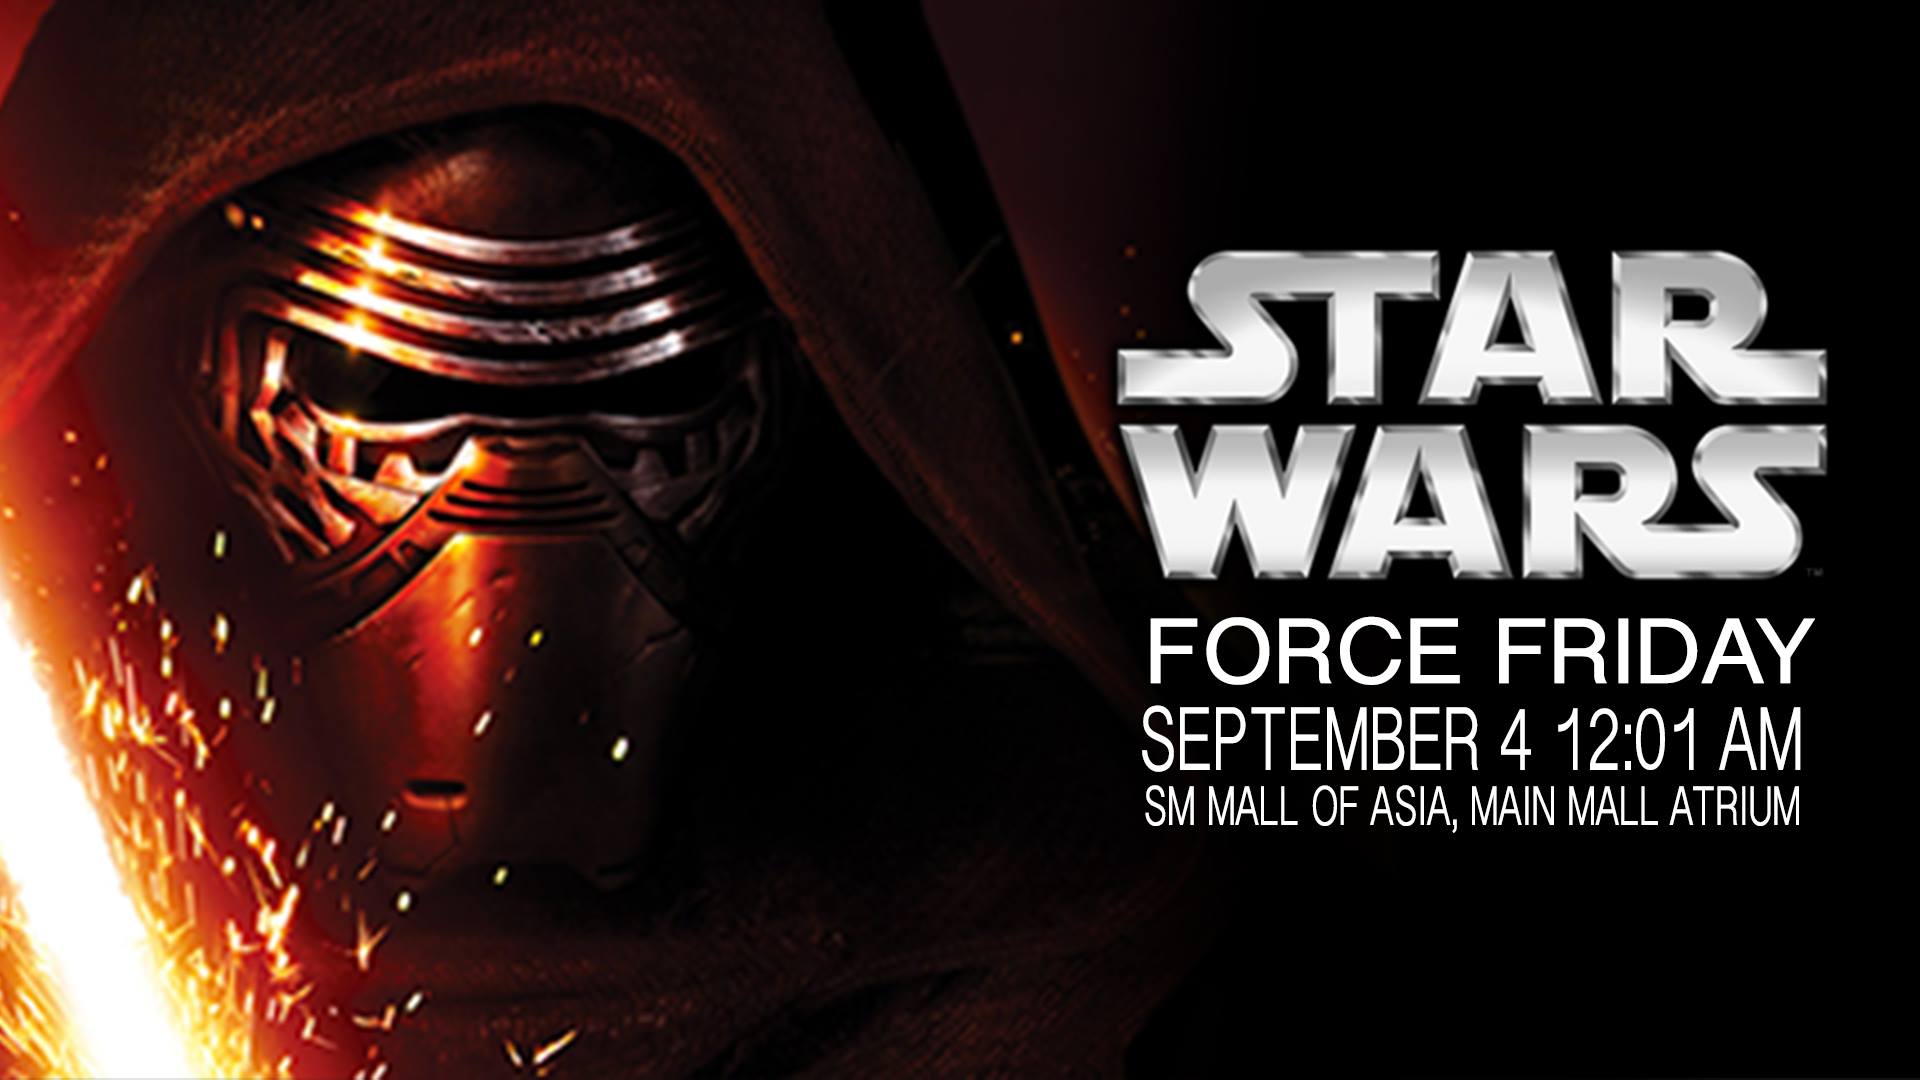 Star Wars: Force Friday     Friday, September 4     at 12:01am     4 days from now · 90°F / 75°F Thunderstorm     	     Show Map     SM Mall of Asia     Jose Diokno Blvd, Bay Area Boulevard, SM Central Business Park, 1300 Pasay City, Philippines Join us in SM Mall of Asia Main Mall Atrium for the official Philippine release of the Force Awakens toys and merchandise this coming September 4 at 12:01 AM. Side activities start at 10 PM but the formal unveiling of the toys to the public will be at midnight. Check out all the toys here: https://imgur.com/a/lbYLw